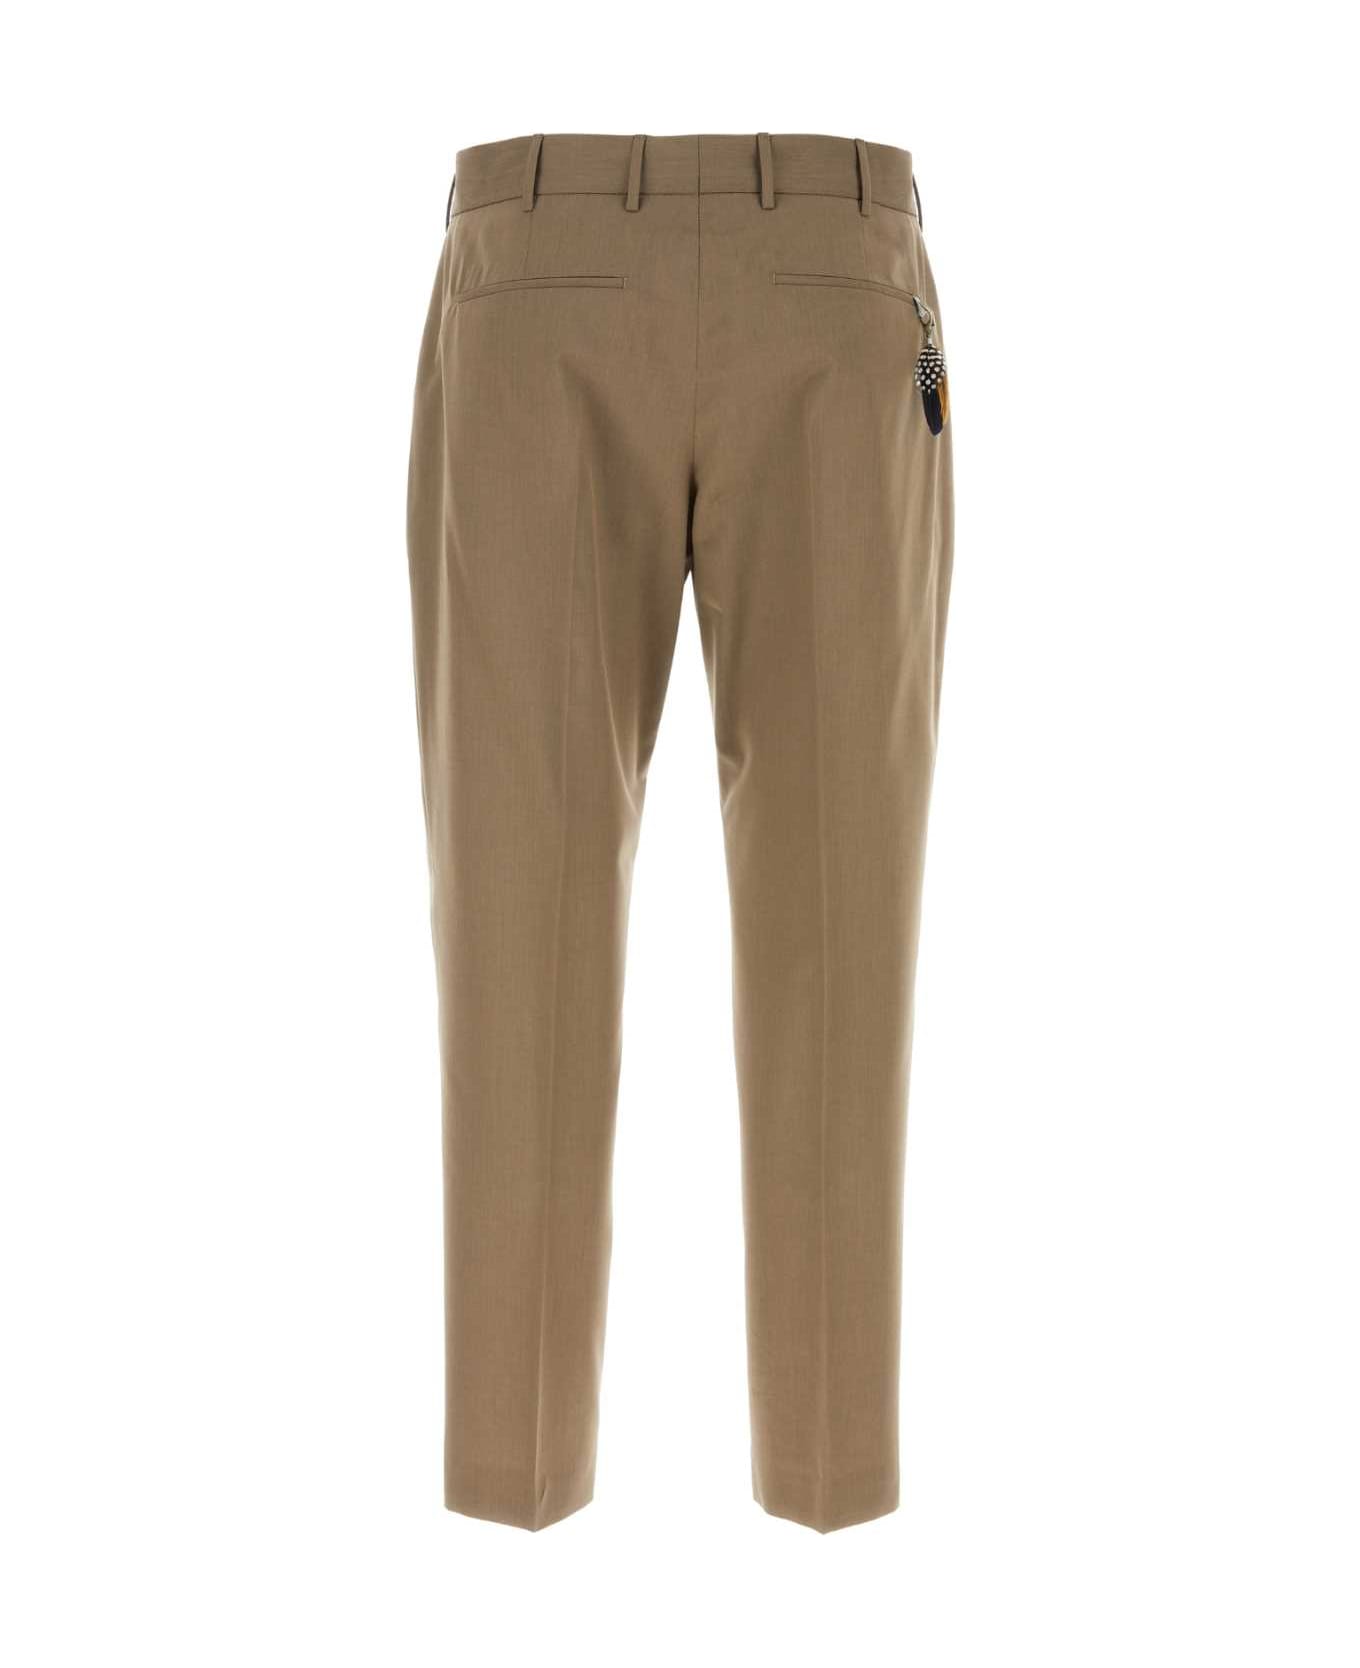 PT01 Cappuccino Stretch Cotton Pant - BEIGE ボトムス